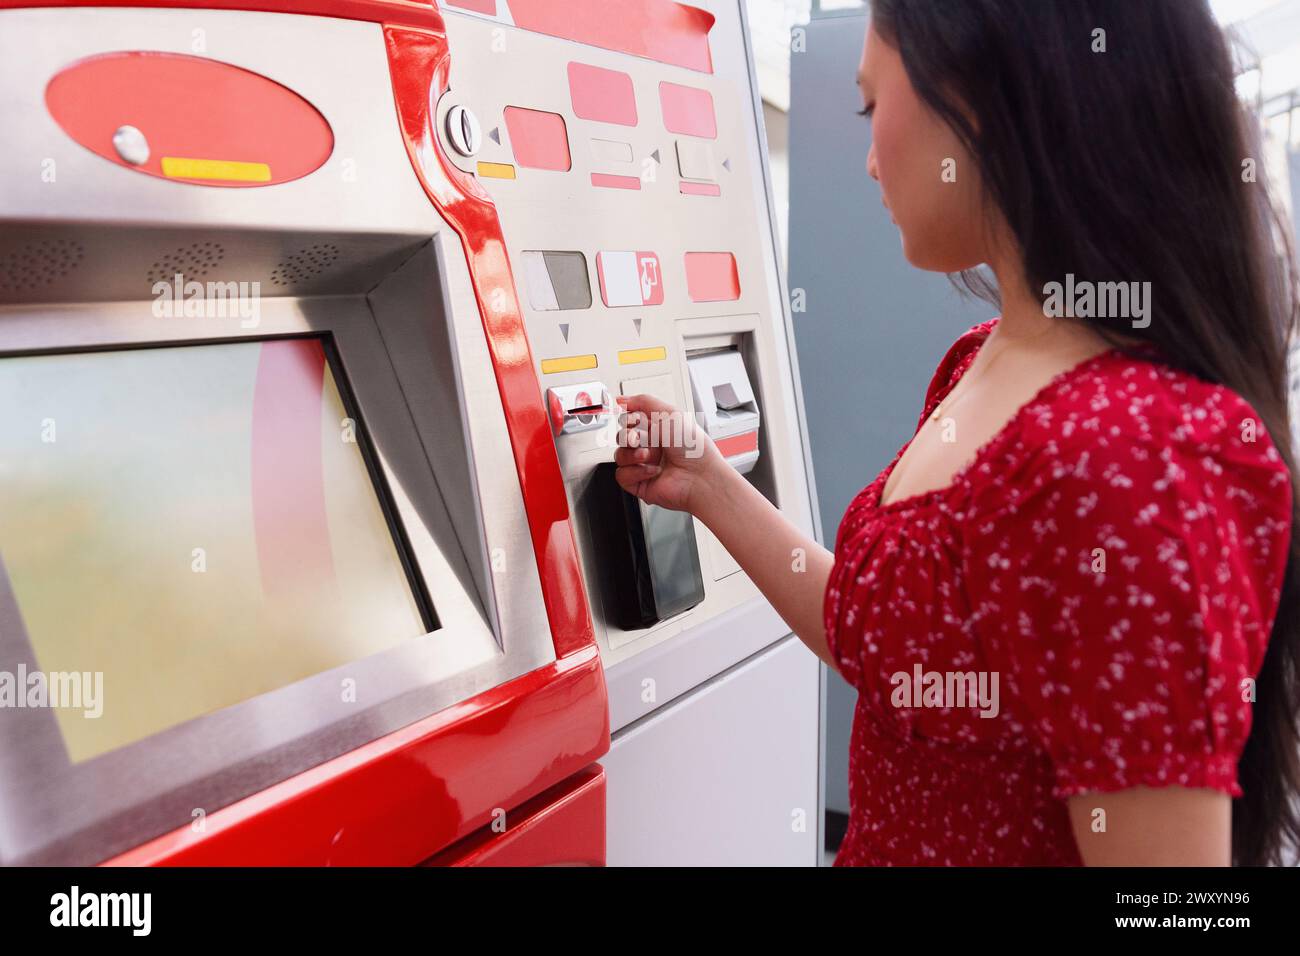 A woman in a vibrant red dress is purchasing a ticket from a modern, red vending machine at a station Stock Photo